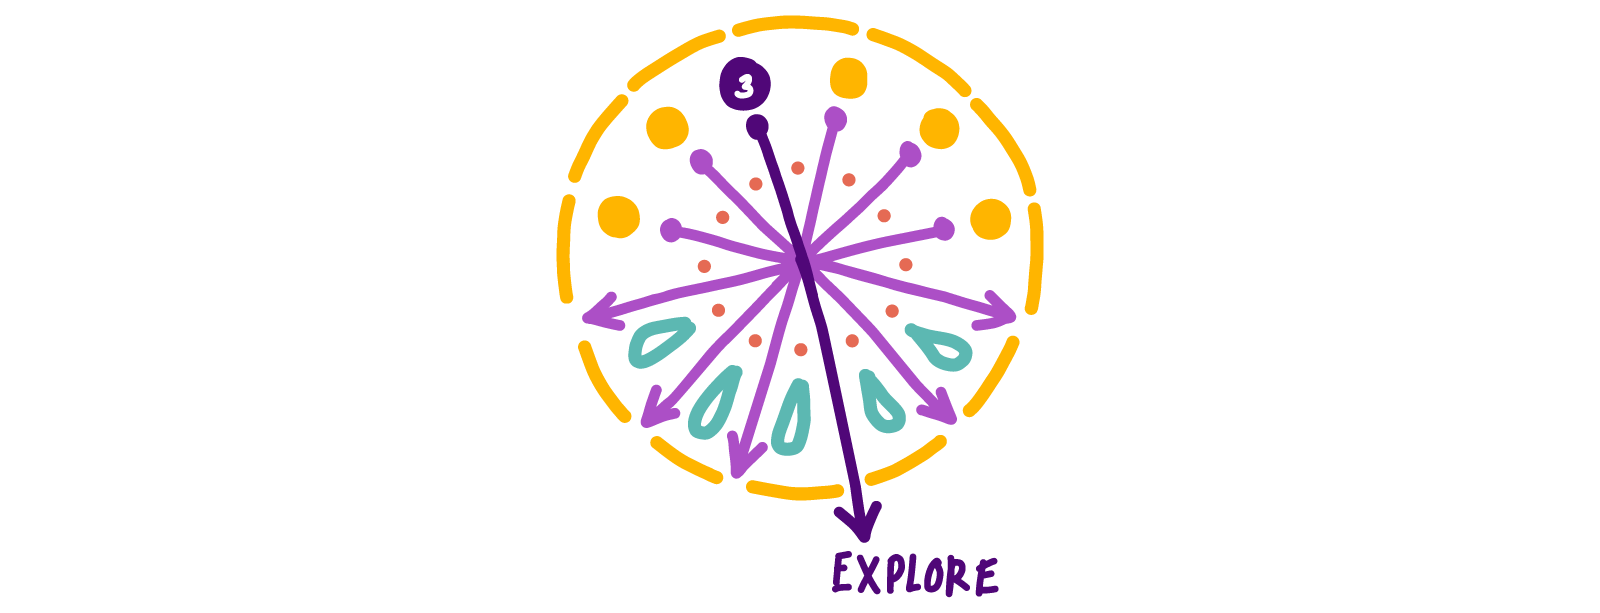 logo for the quest project explore page